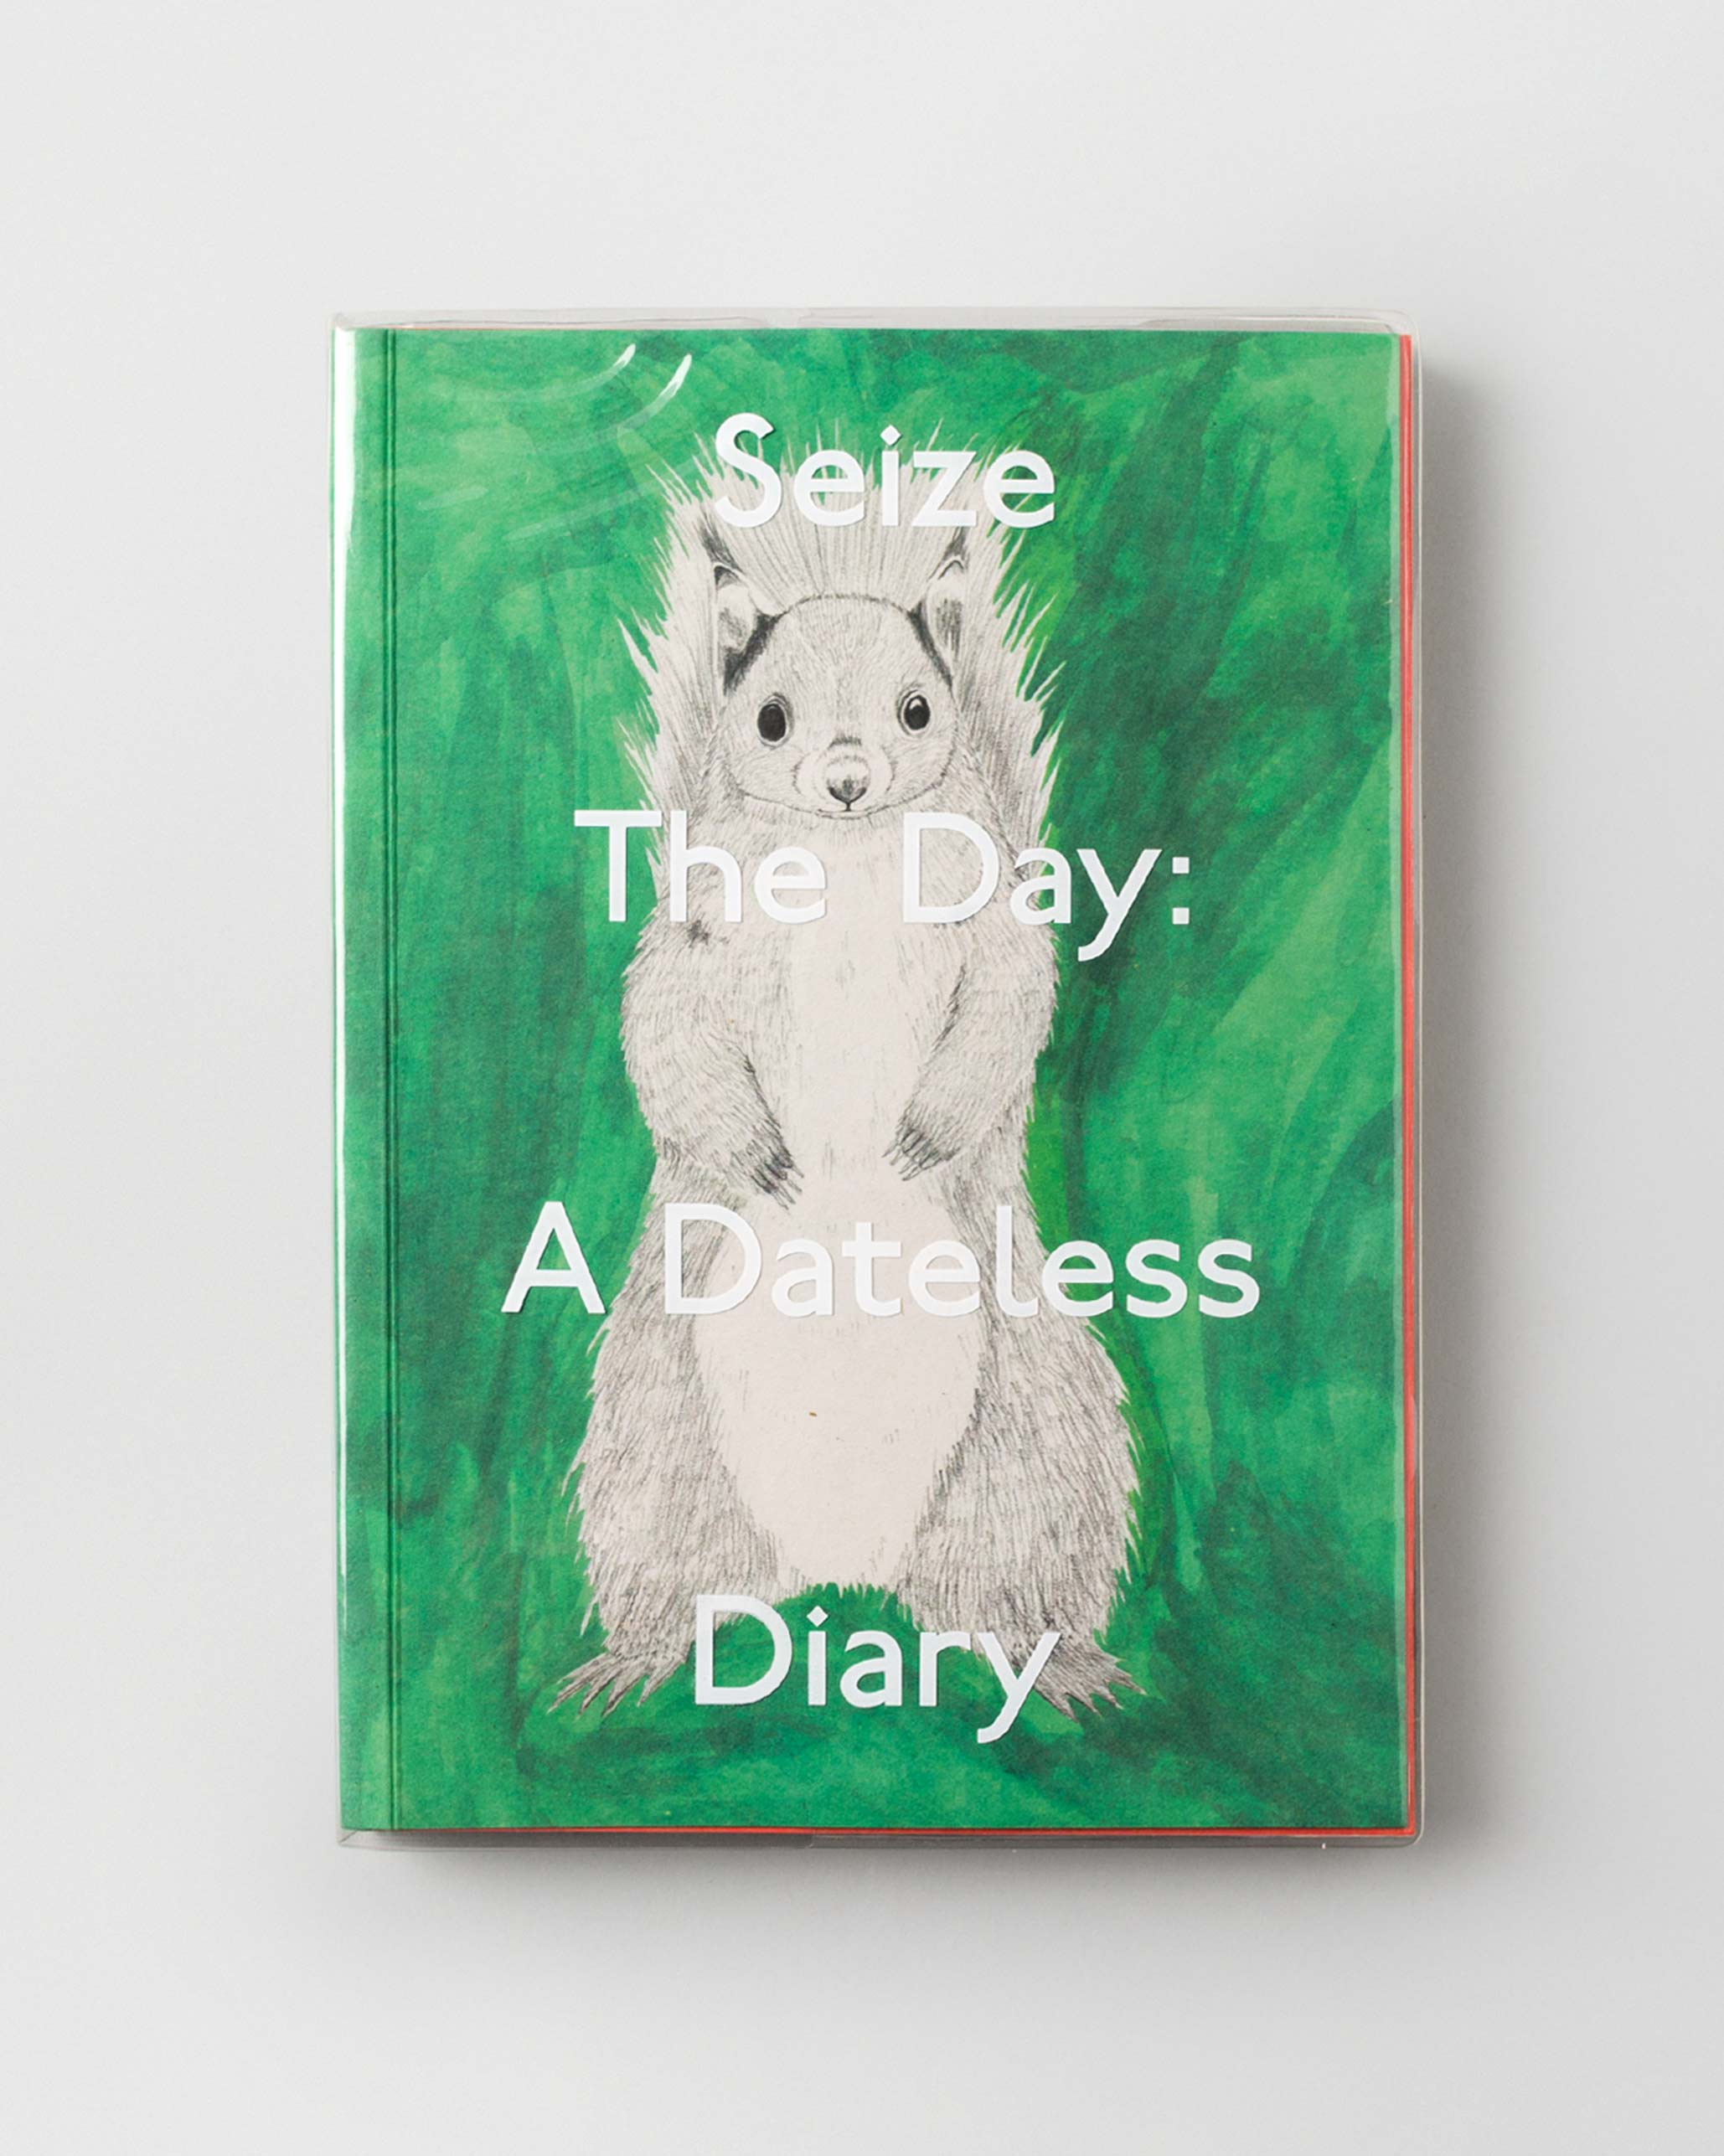 Seize the Day: A Dateless Planner (Diary)